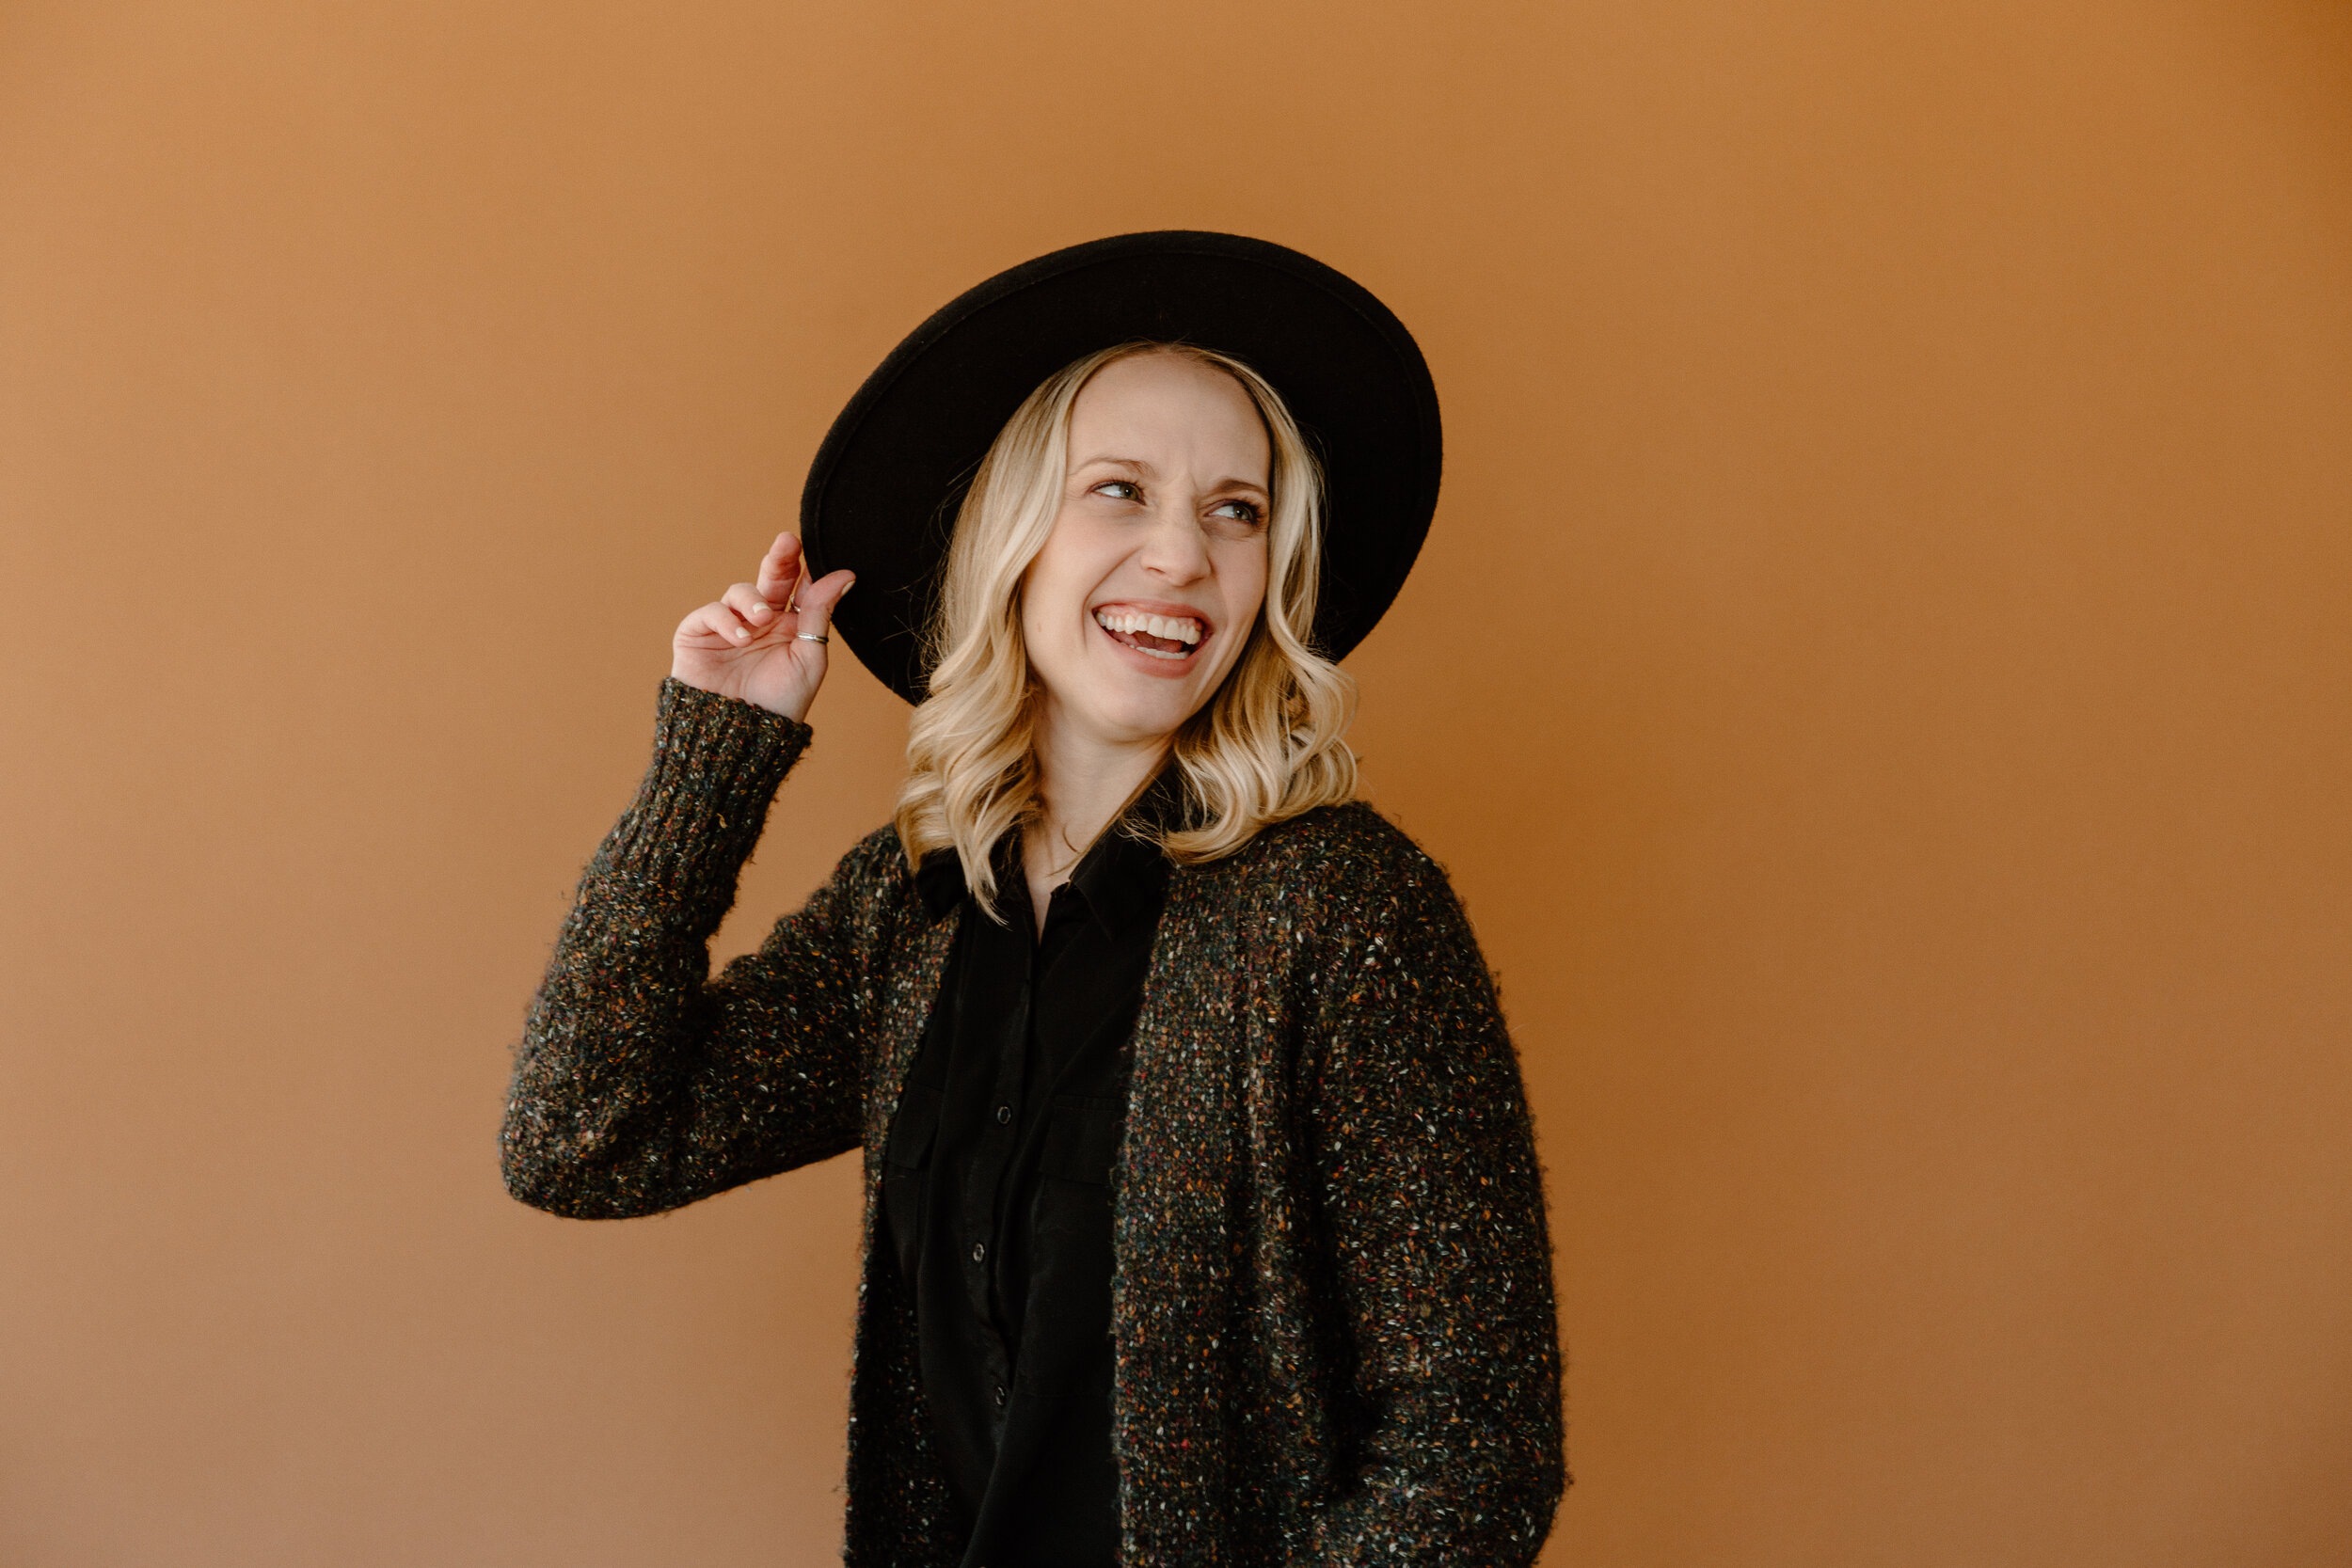 Photo from a branding shoot at West Studio in Ferndale, Michigan. Madison wore a wide-brimmed hat and cozy sweater to contrast the orange background.